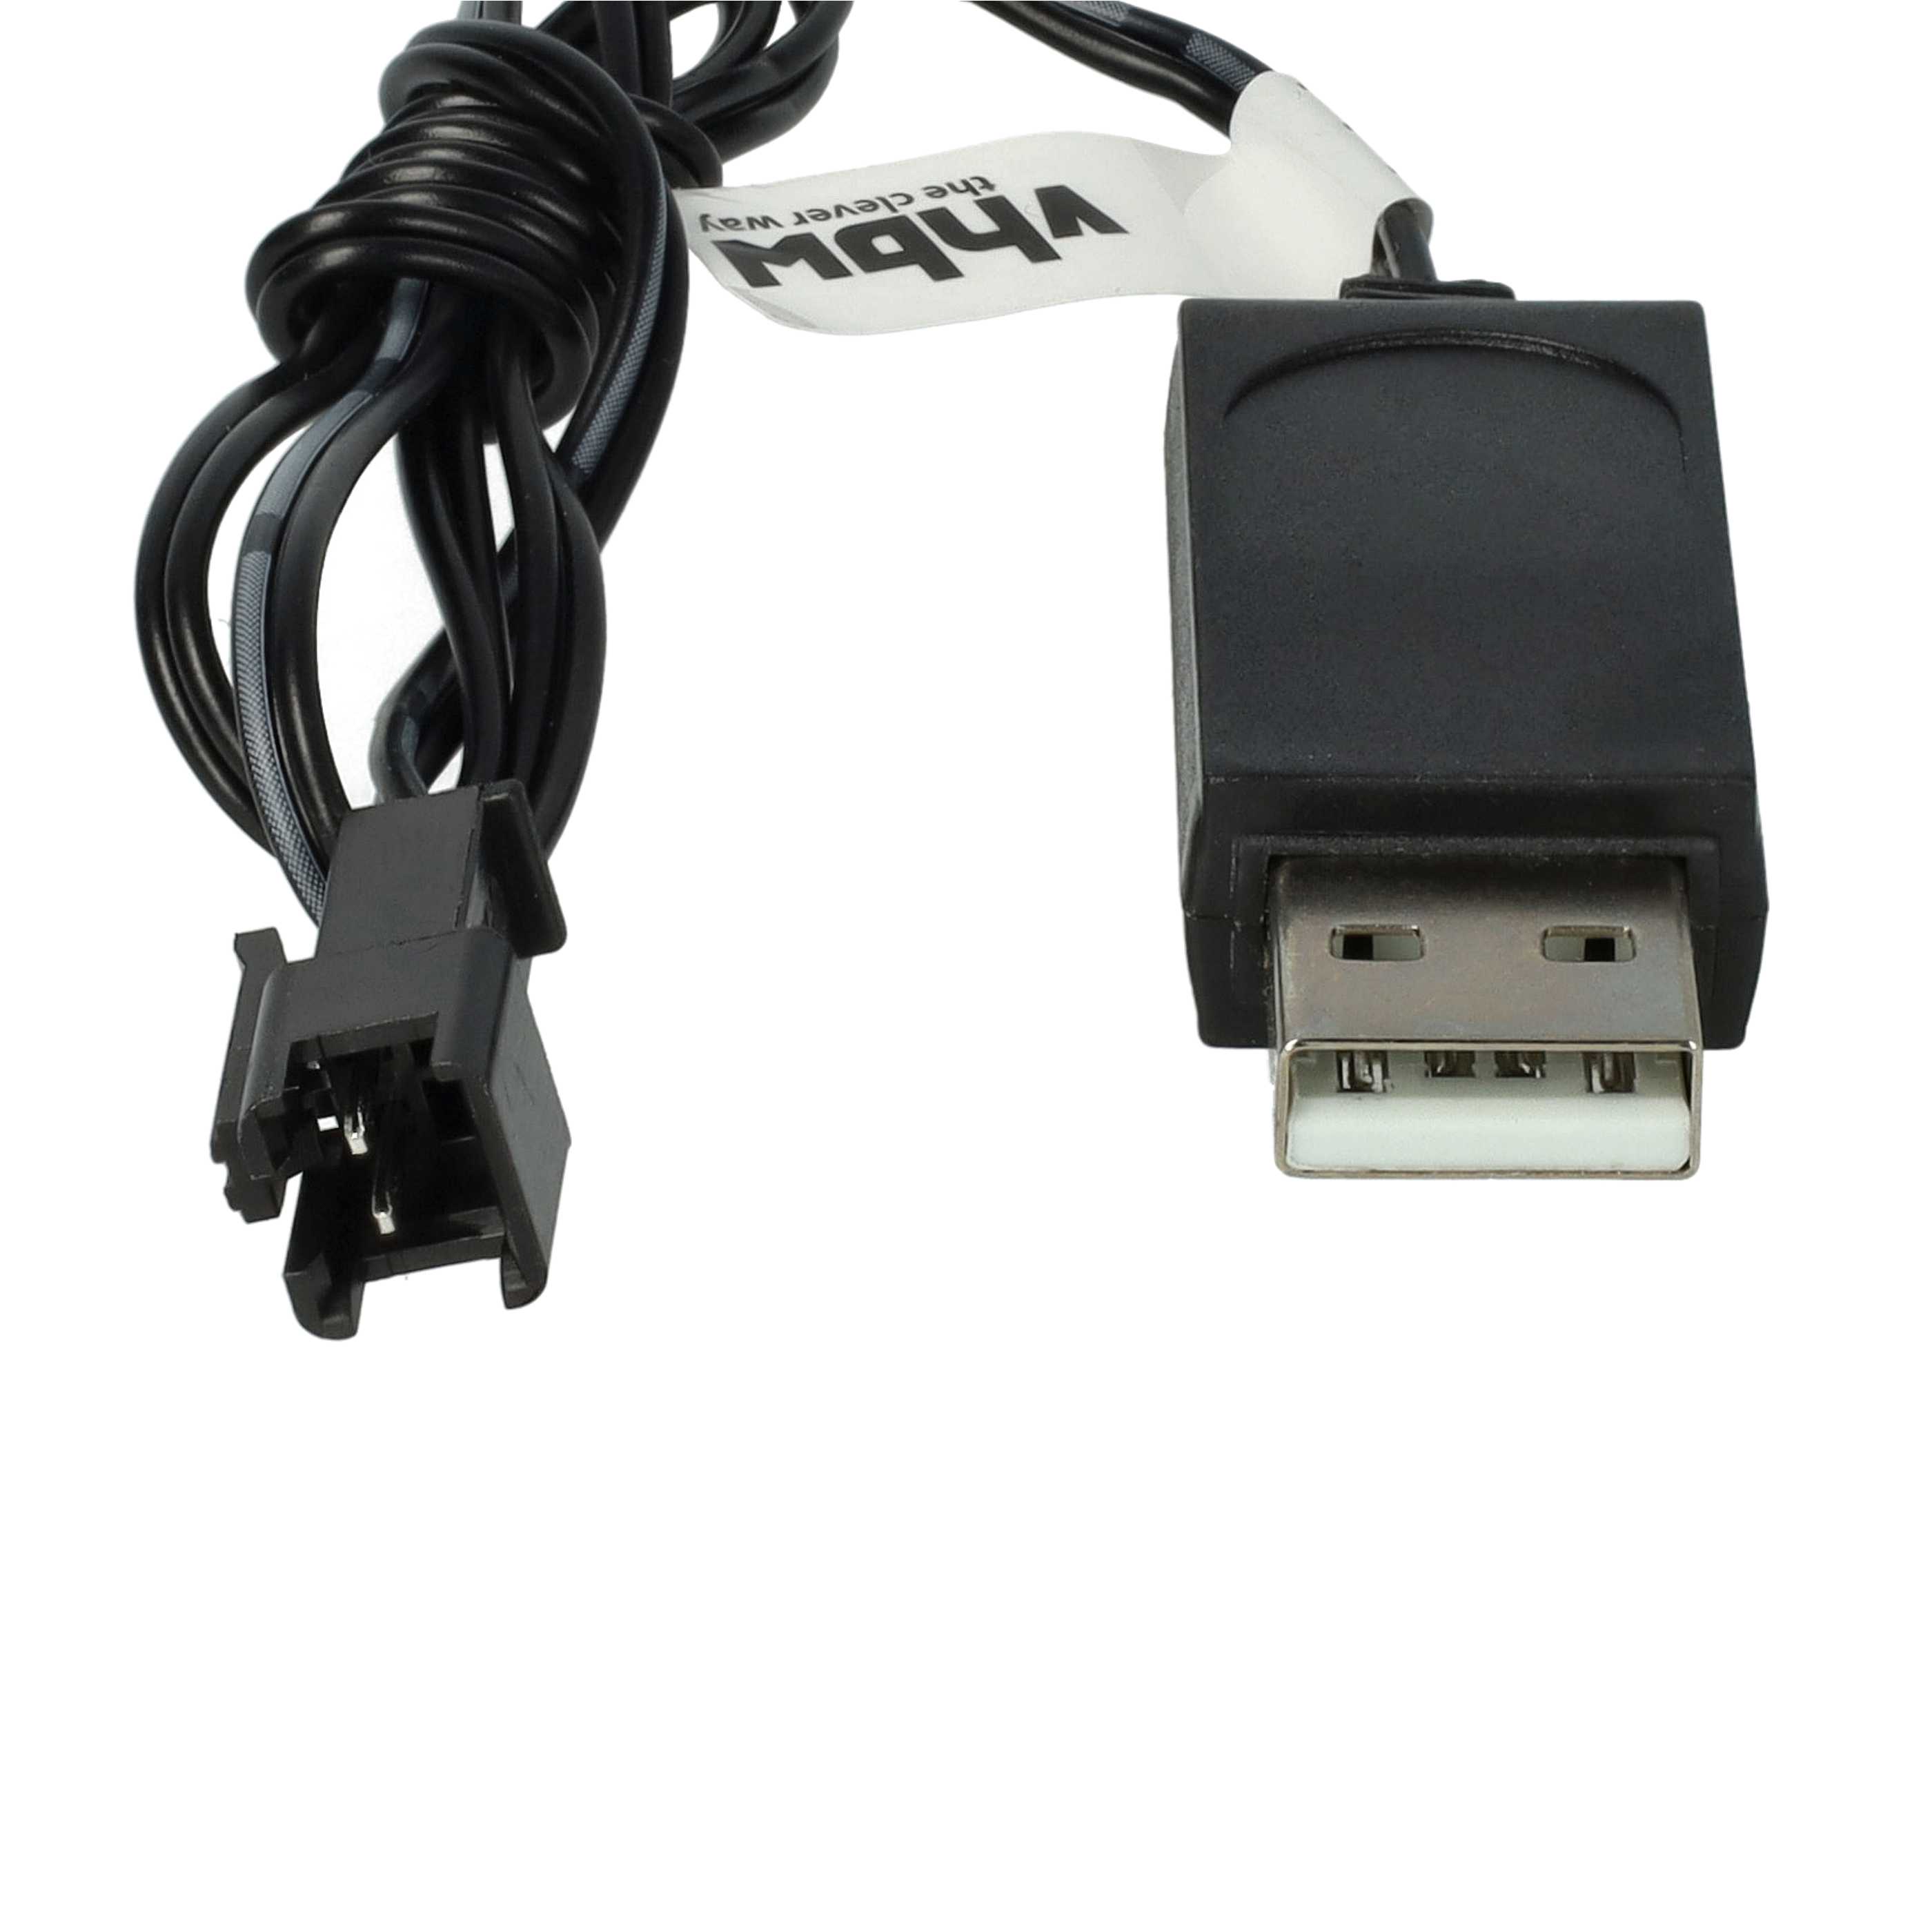 USB Charging Cable suitable for RC Batteries with SM-2P Connector, RC Model Making Battery Packs - 60 cm 4.8 V